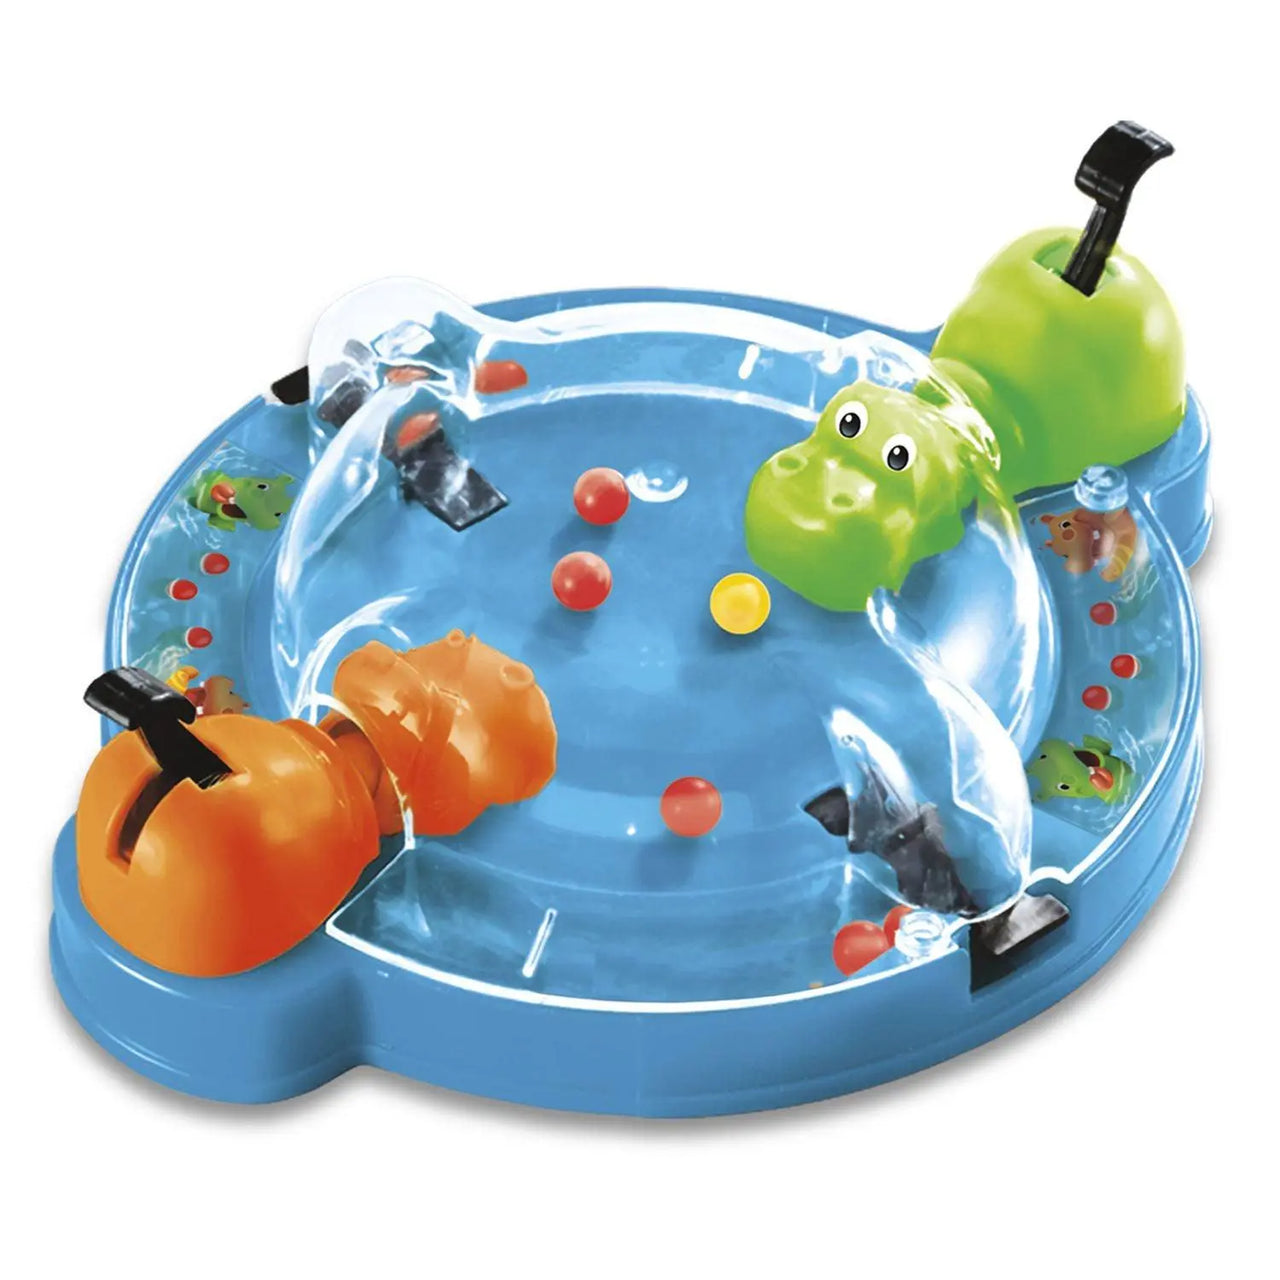 Elefun &#038; Friends Hungry Hungry Hippos Grab &#038; Go Game1